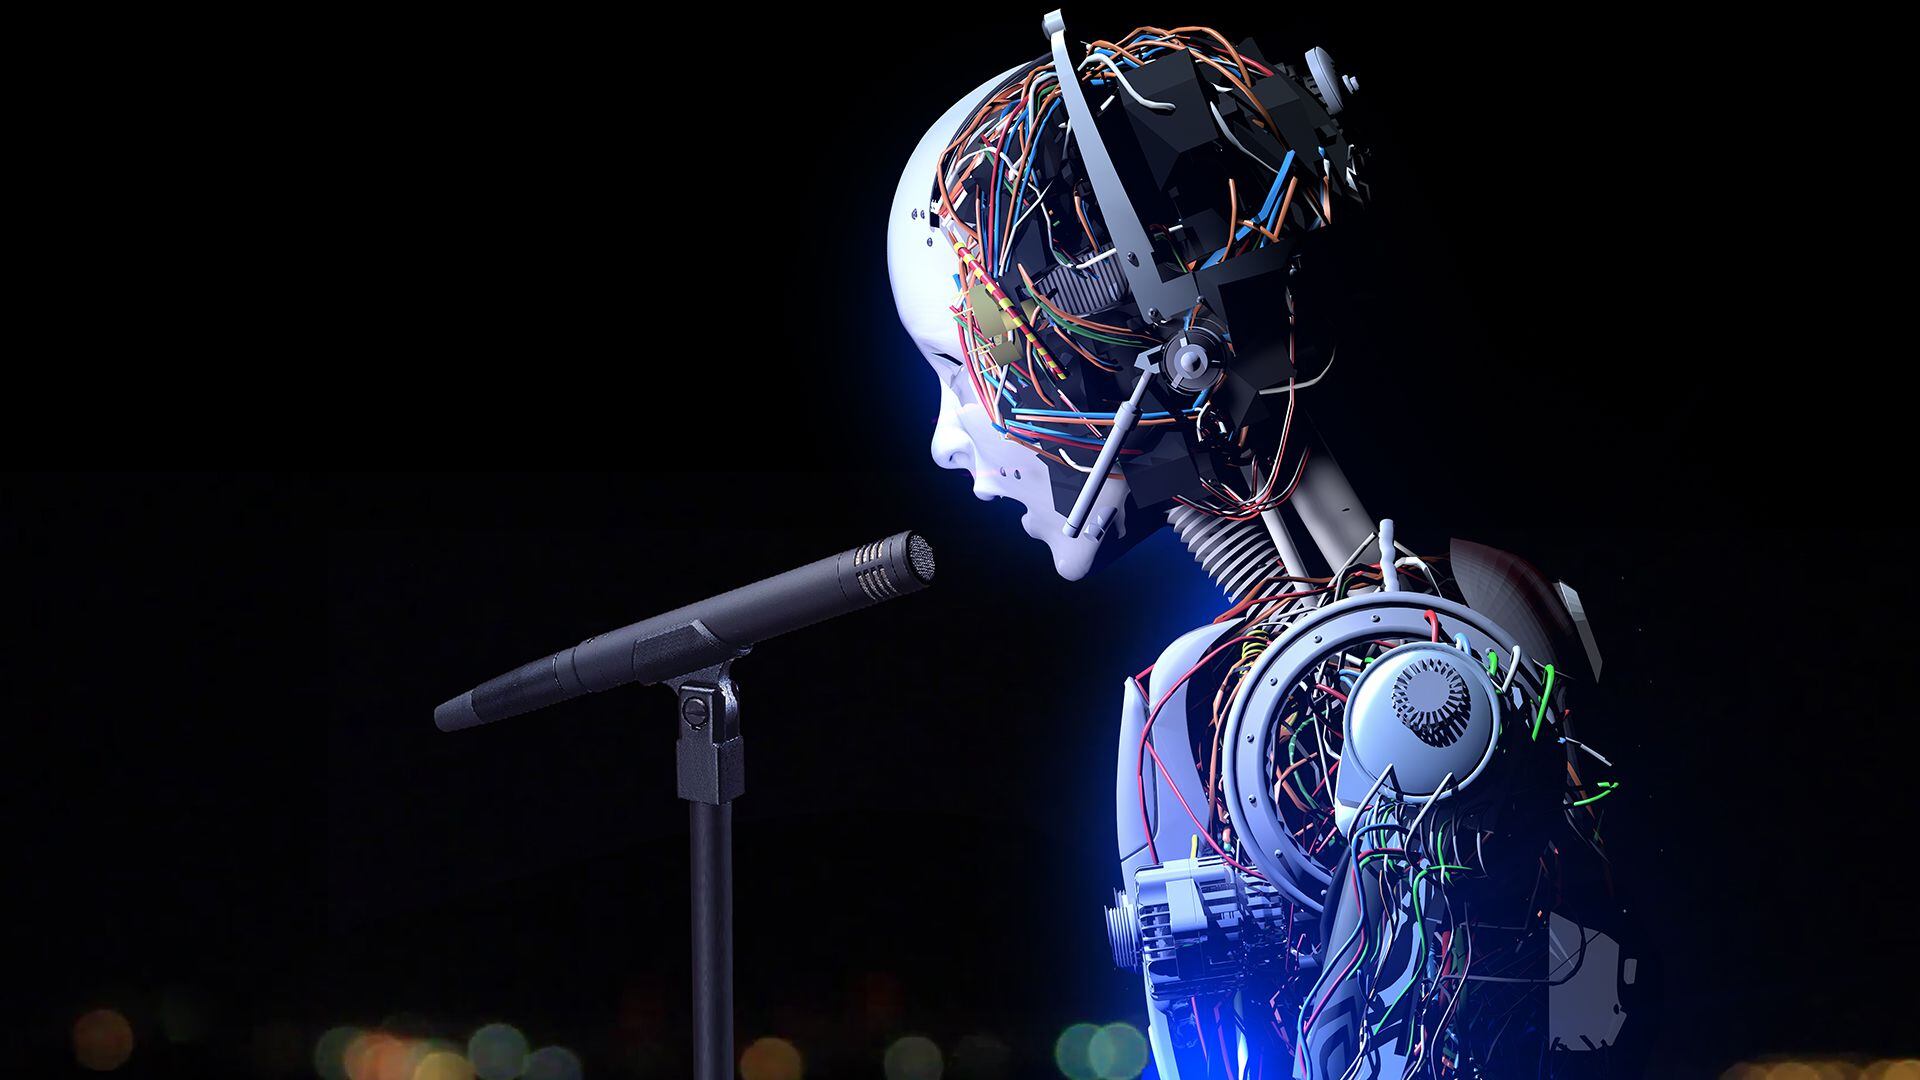 II. Understanding the Role of Artificial Intelligence in Music